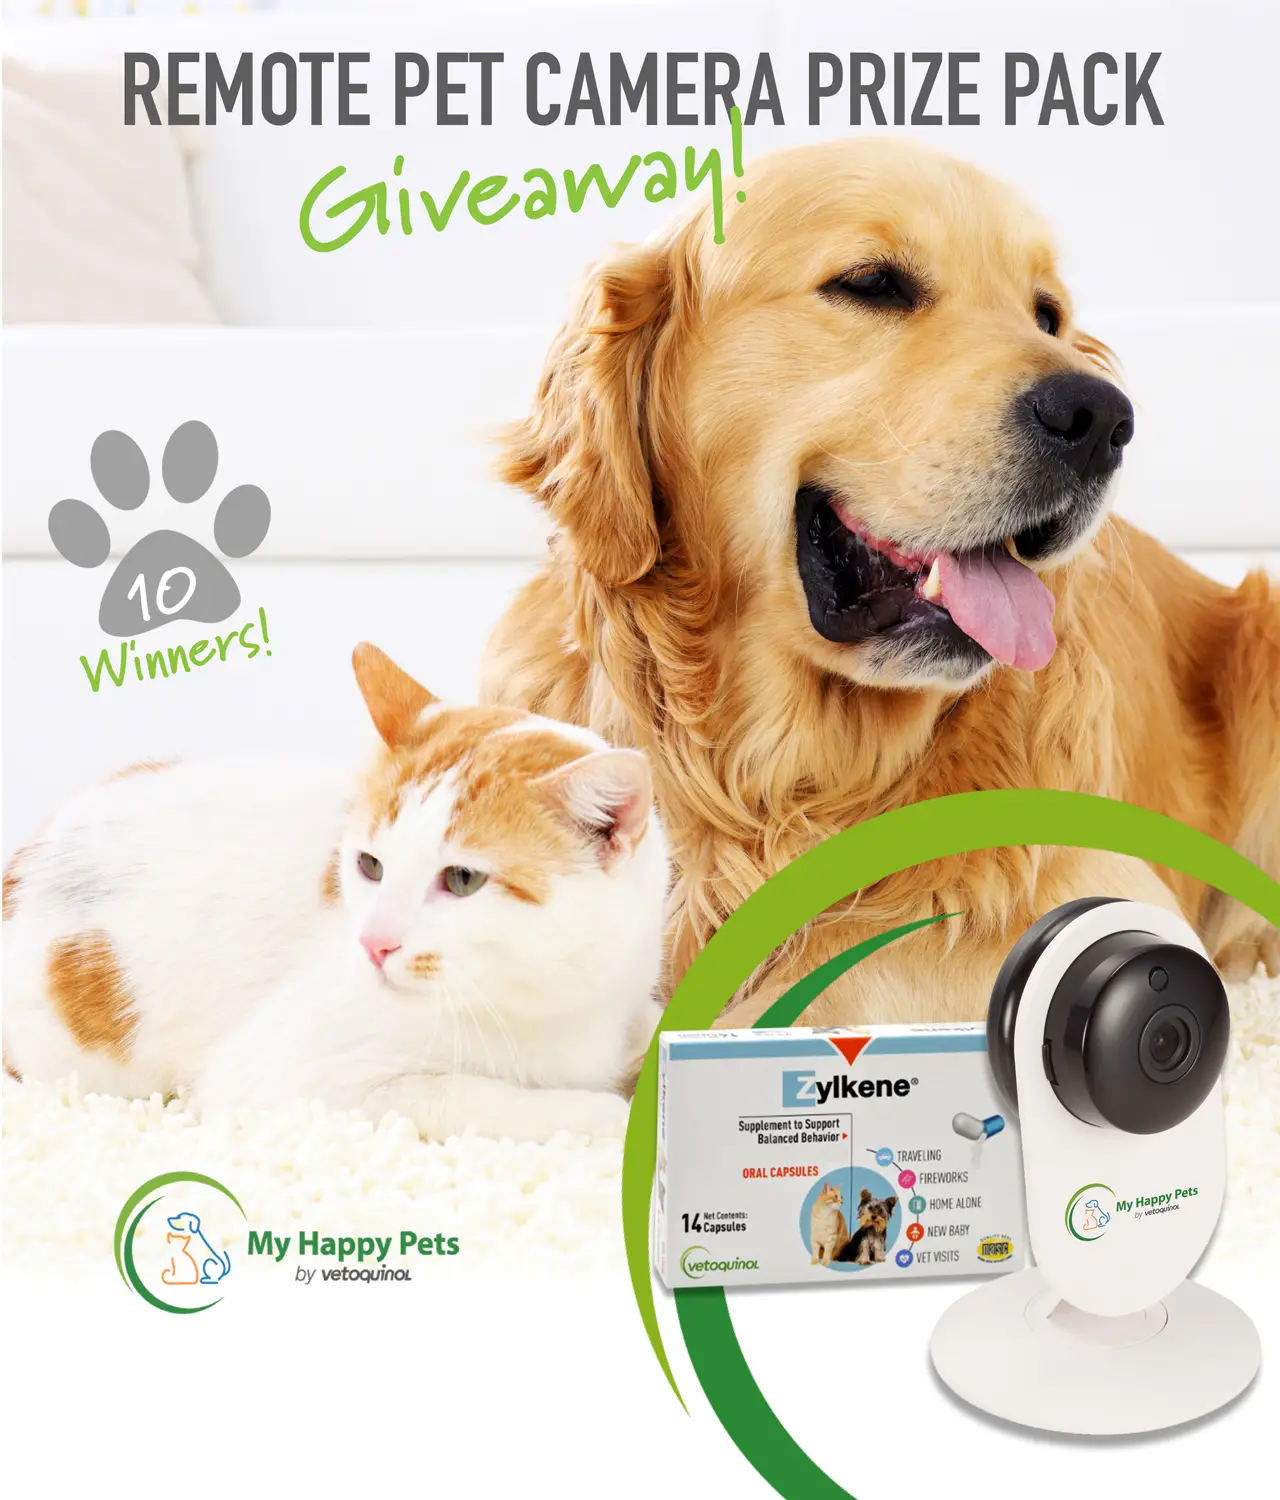 My Happy Pets Remote Pet Camera Giveaway - Ten (10) winners will each receive remote pet camera and a 30-day supply of Zylkene calming supplements for their cat or dog, retailed at approximately $130 US each